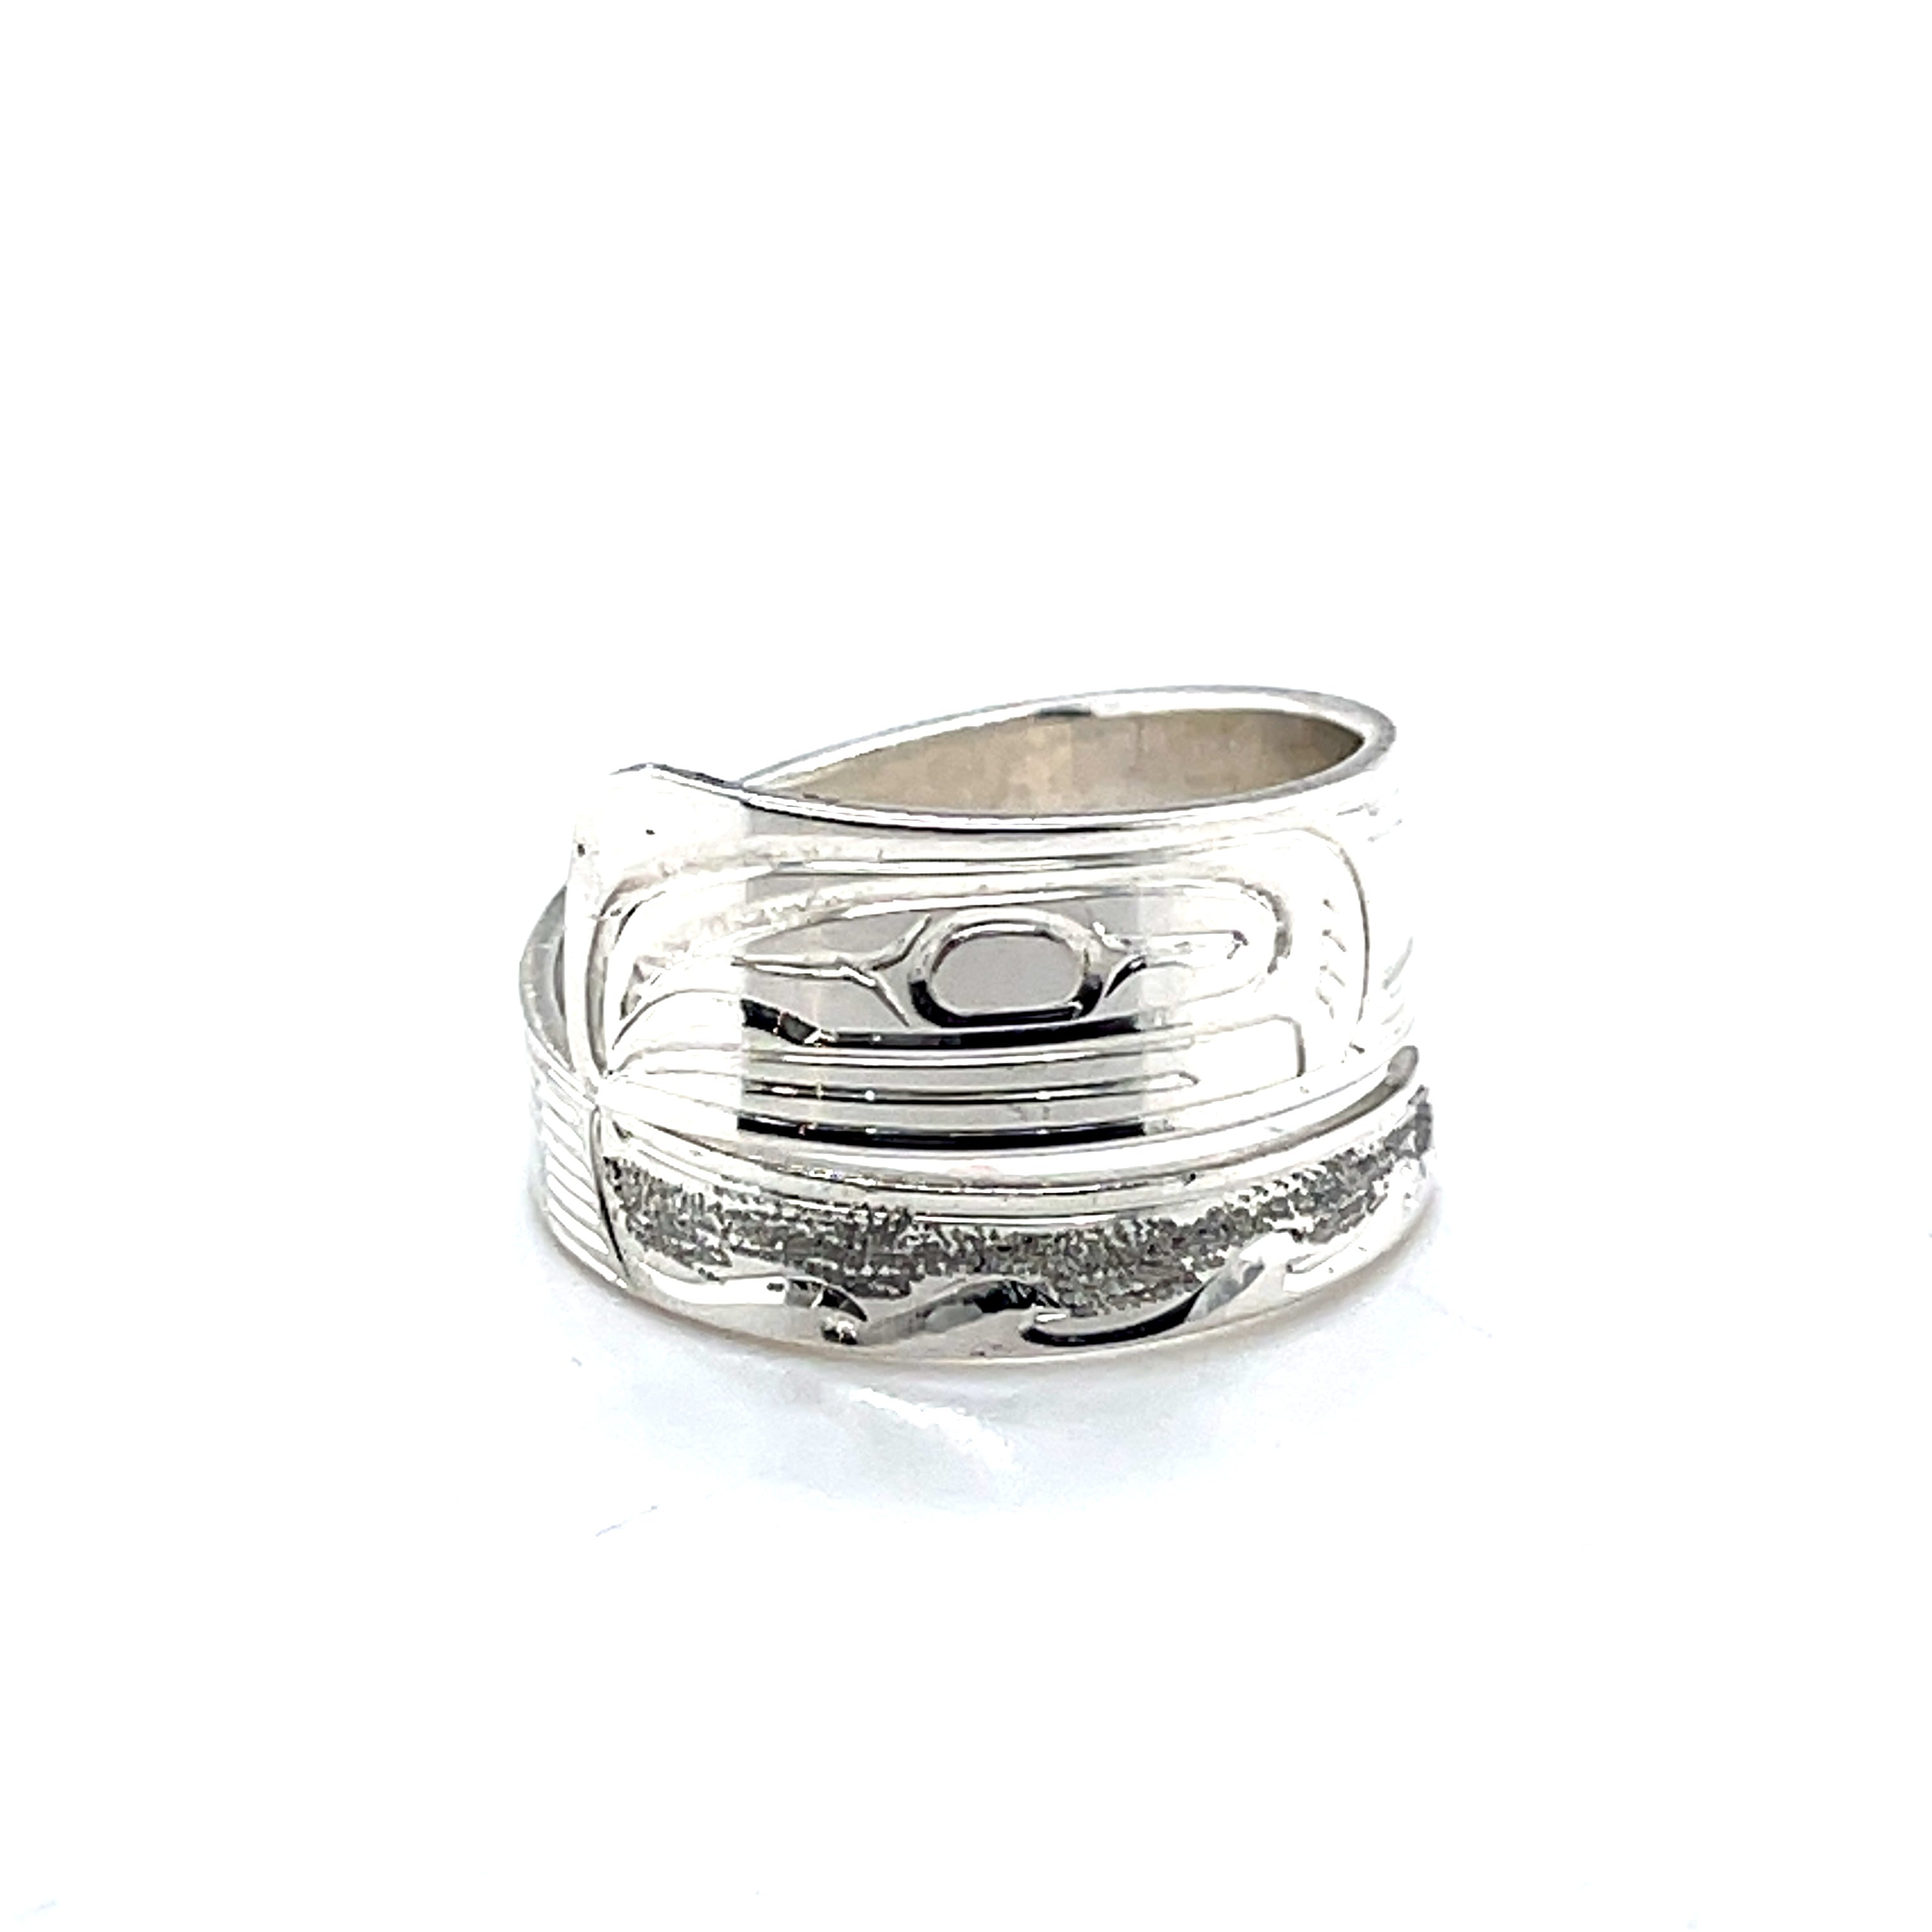 Ring - Sterling Silver - Wrap - Salmon - Size 9